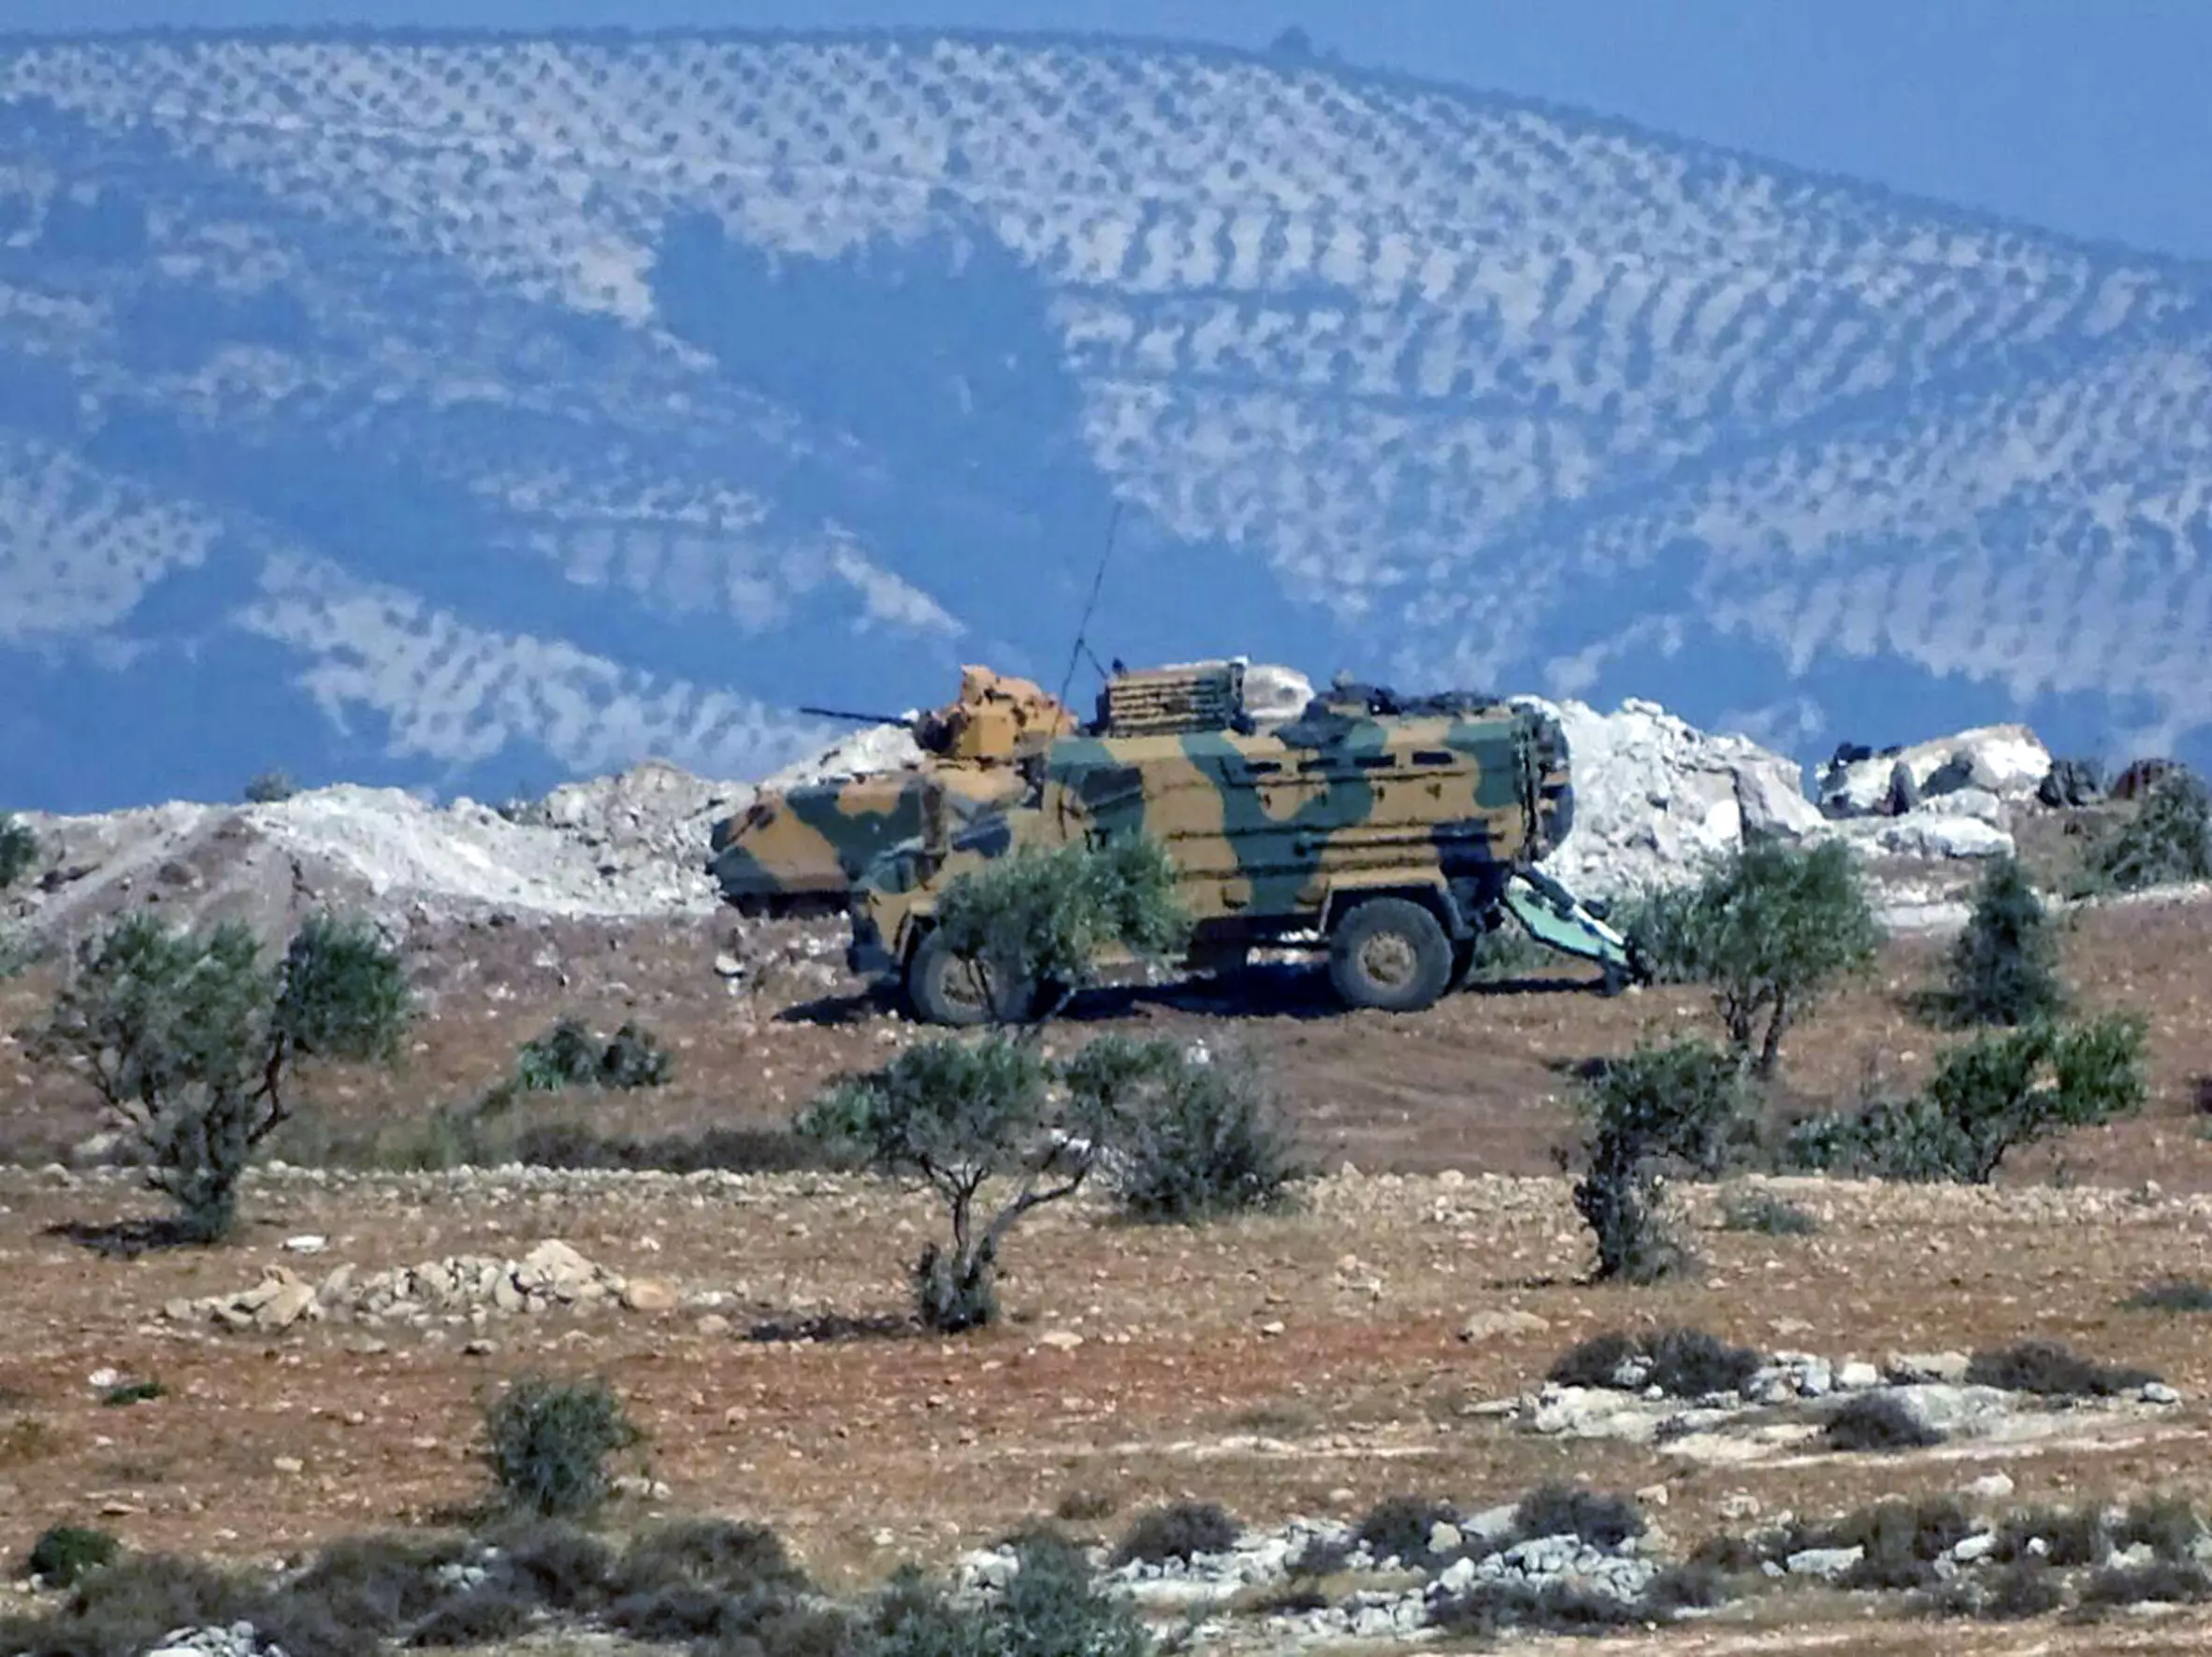 A Turkish army vehicle is deployed in Idlib province, Syria (